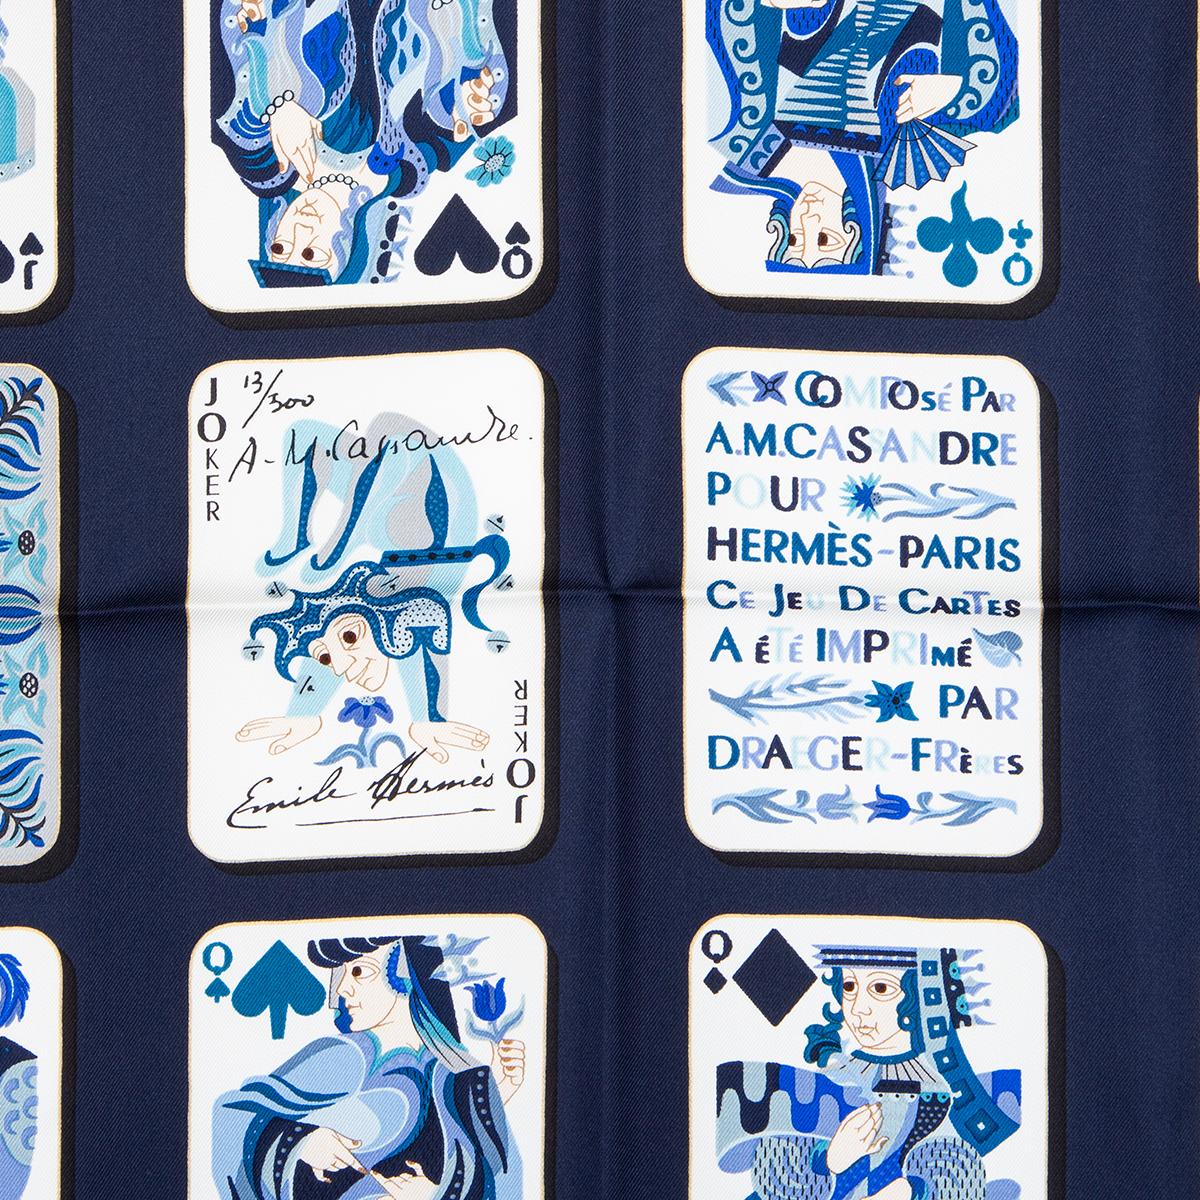 Hermes 'Jeu de Cartes 90' in white silk twill (100%) with details in midnight and petrol blue. Brand new with tag.

Width 90cm (35.1in)
Height 90cm (35.1in)